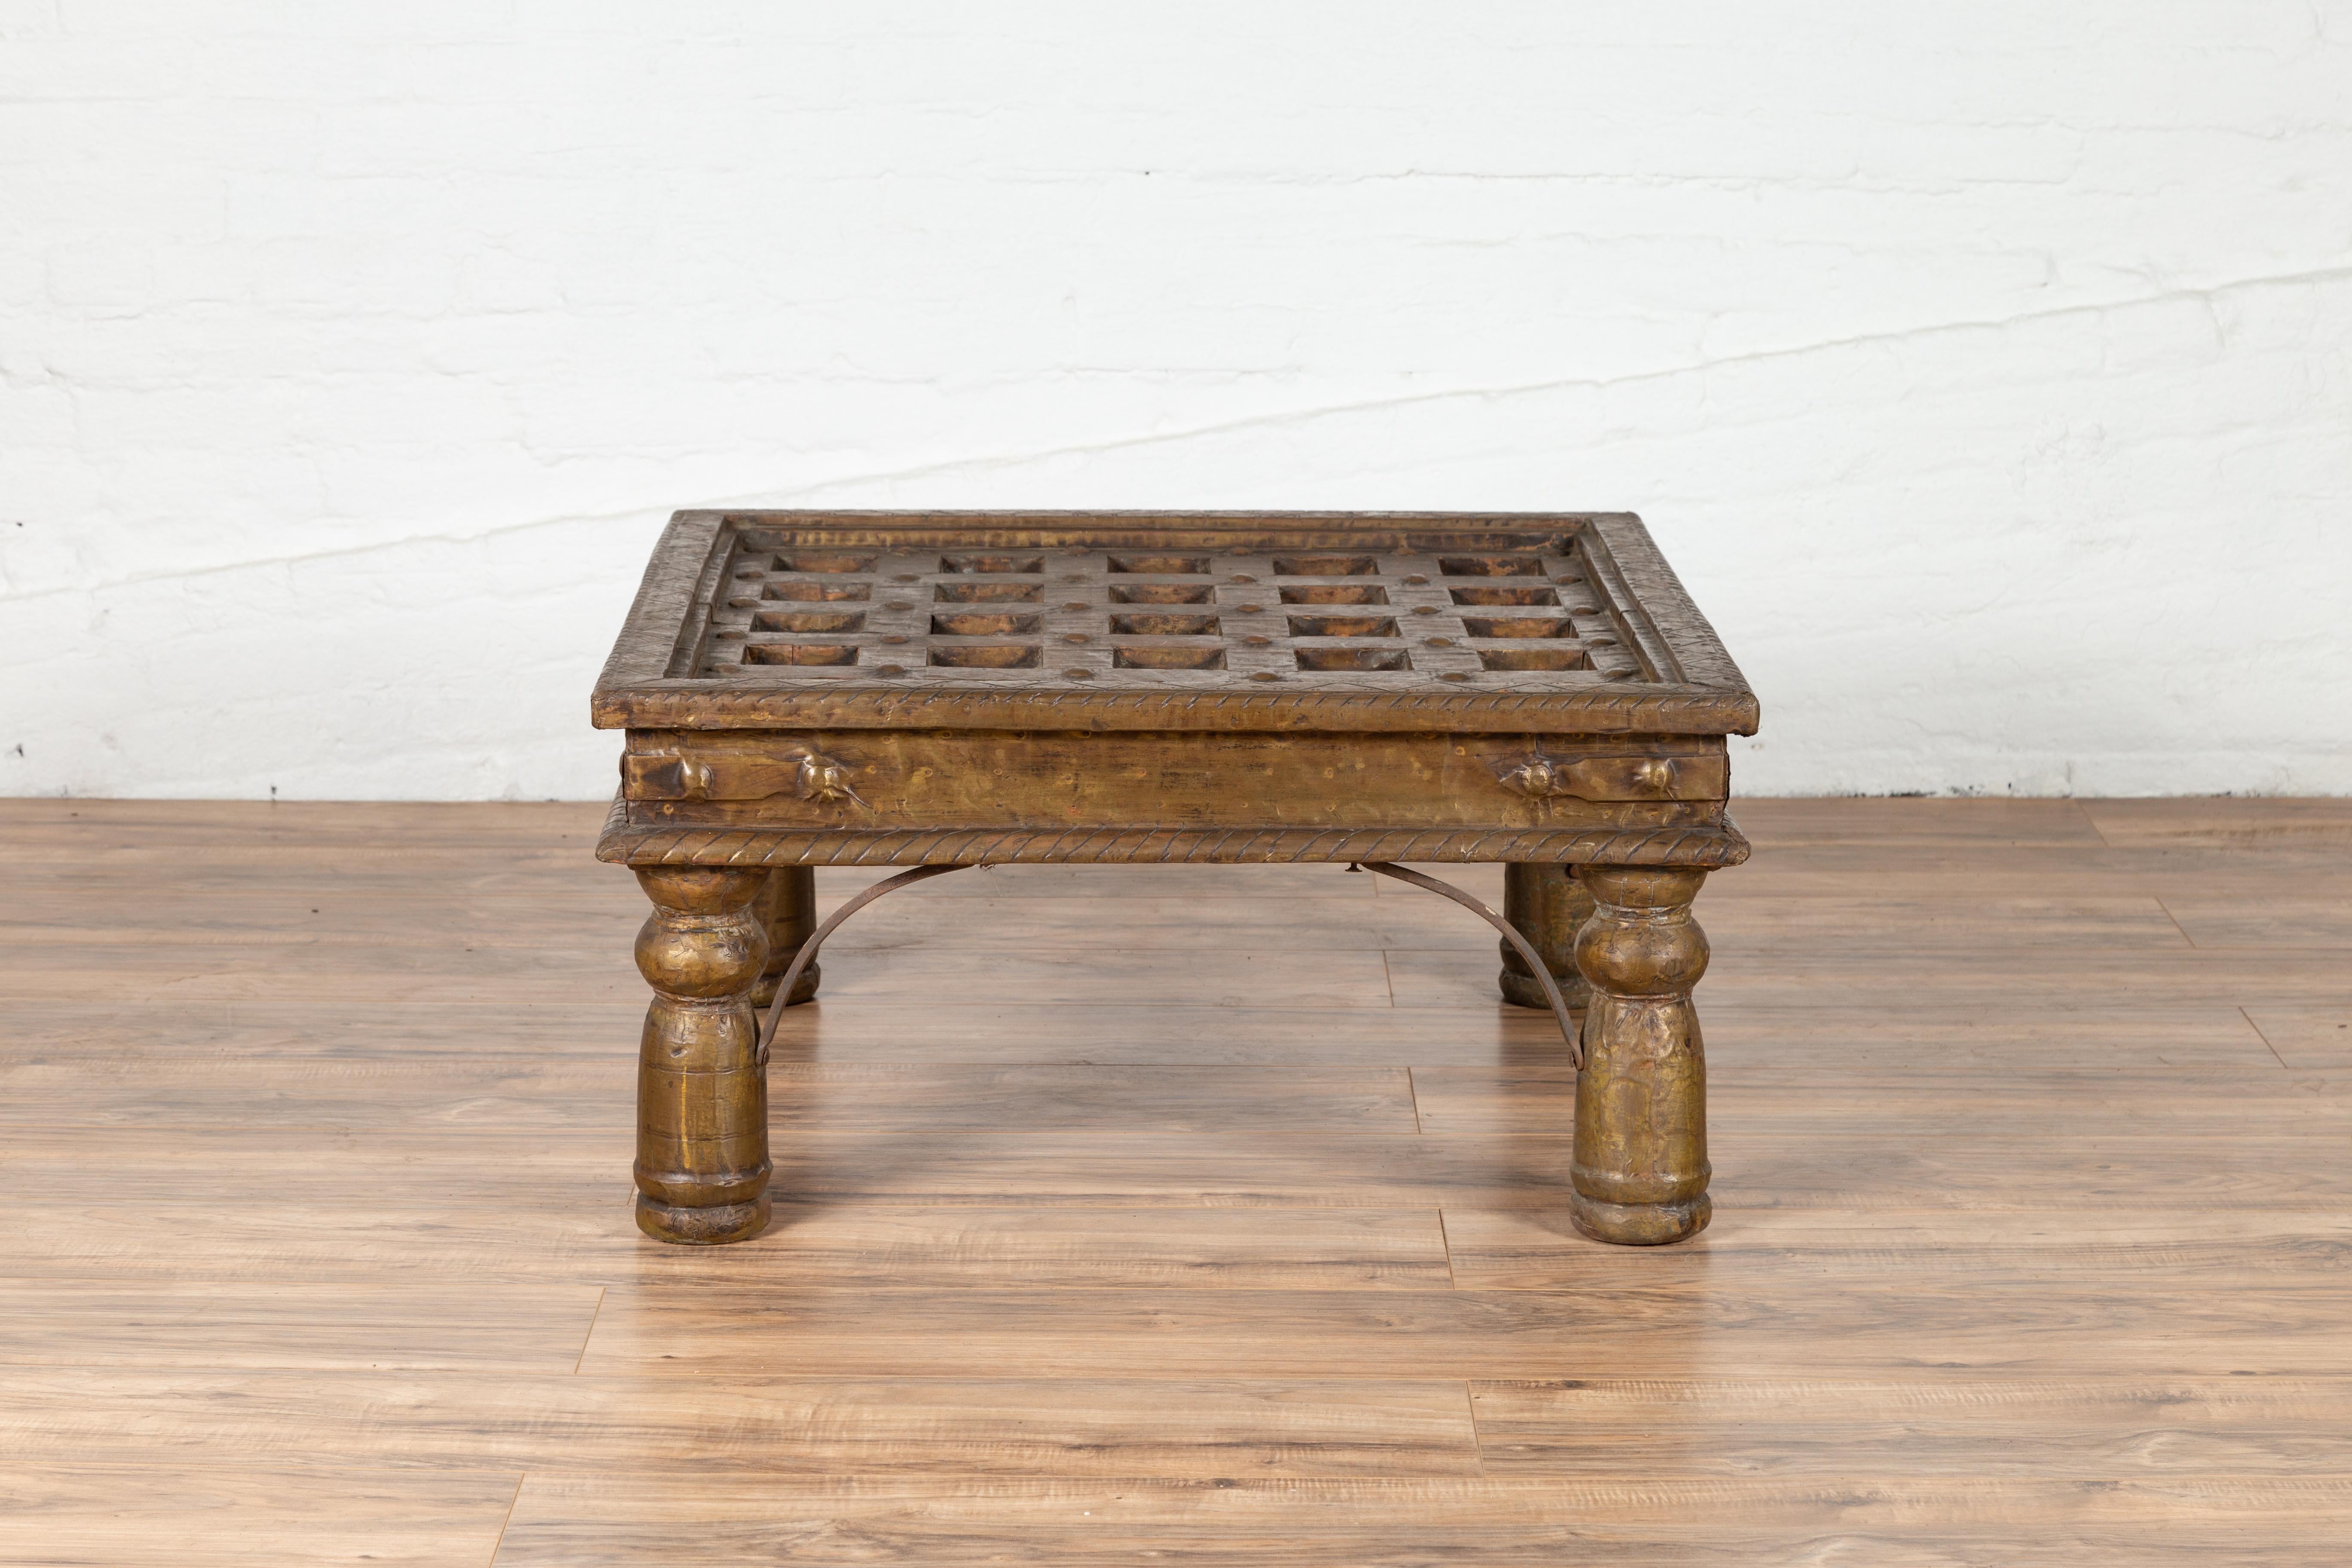 Indian Geometric Top Wood and Brass Window Grate Made into a Coffee Table 7